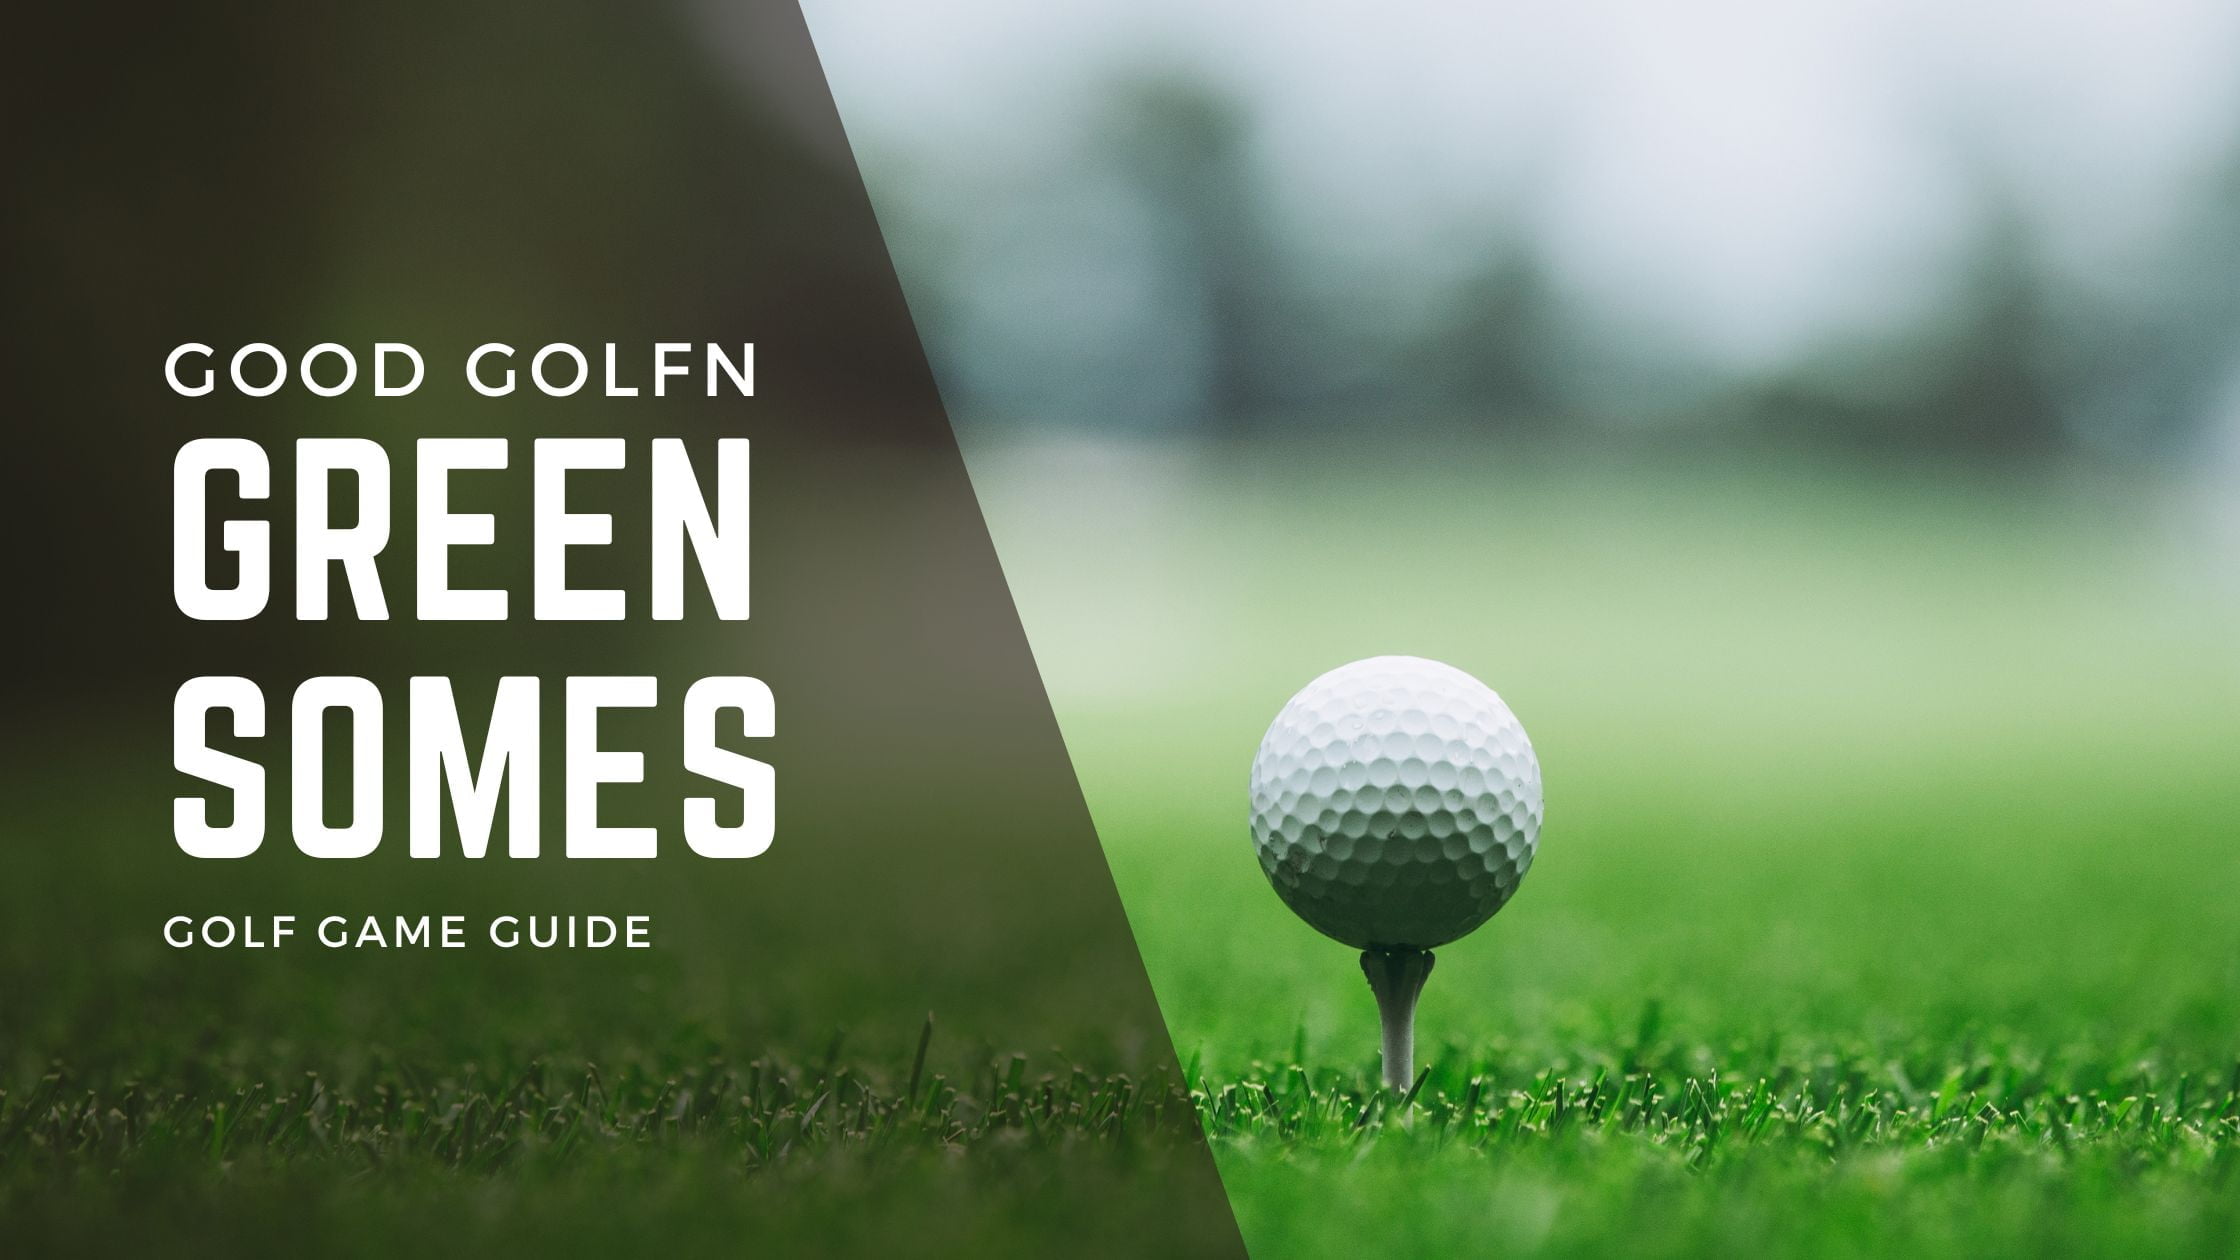 Dive into the world of greensomes golf! Master the game with history, rules, and top strategies. Perfect for newbies and seasoned golfers alike